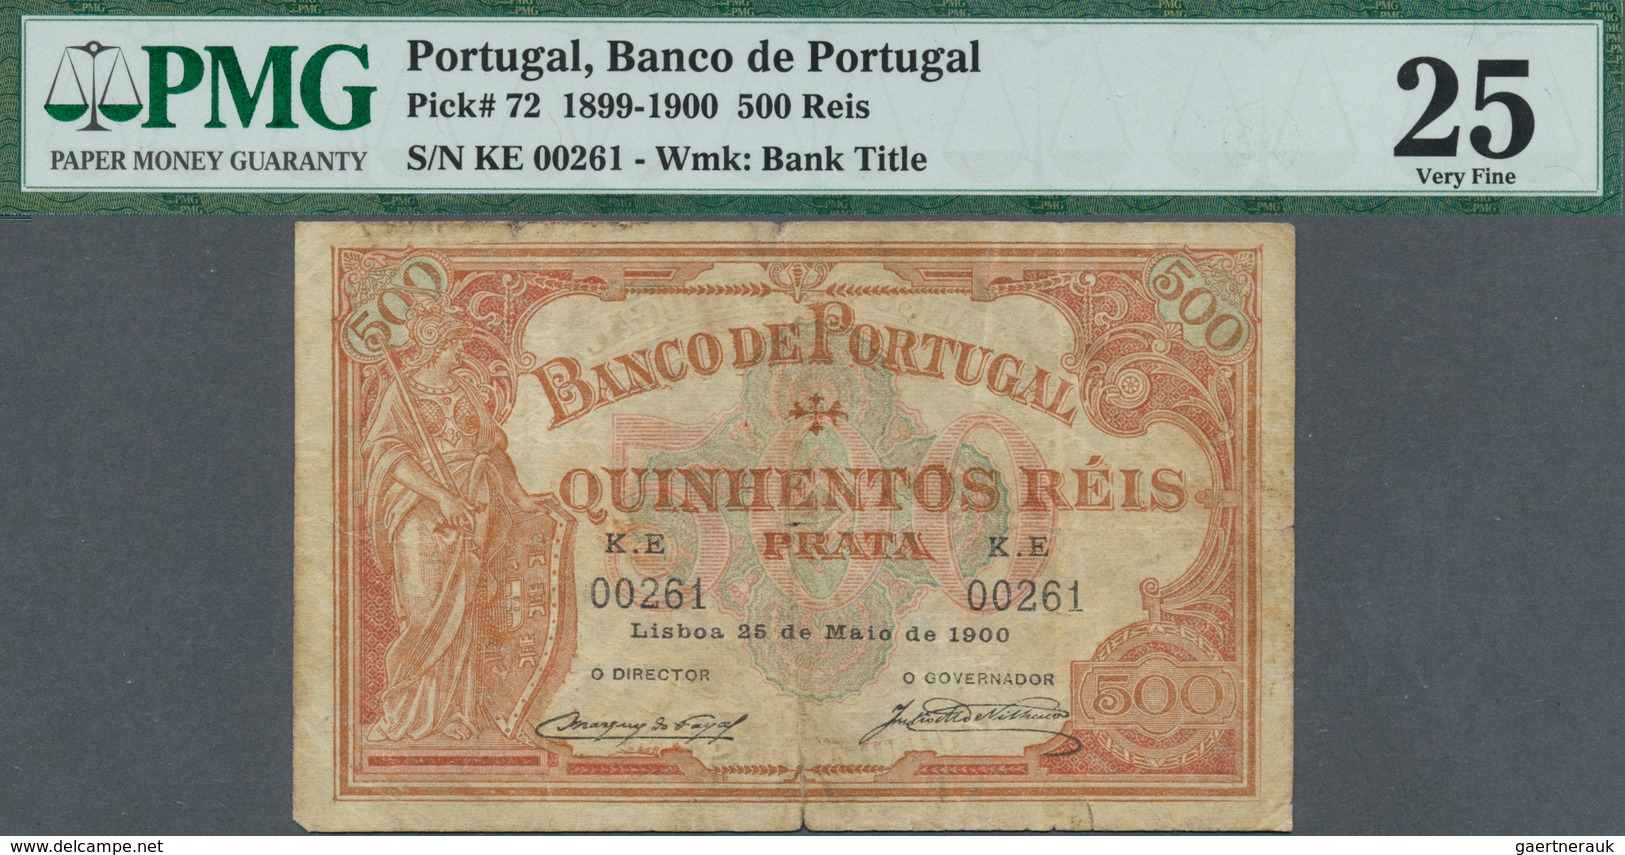 02219 Portugal: Banco De Portugal 500 Reis 1900, P.72, Stained Paper With Several Folds, Tiny Hole At Cent - Portugal